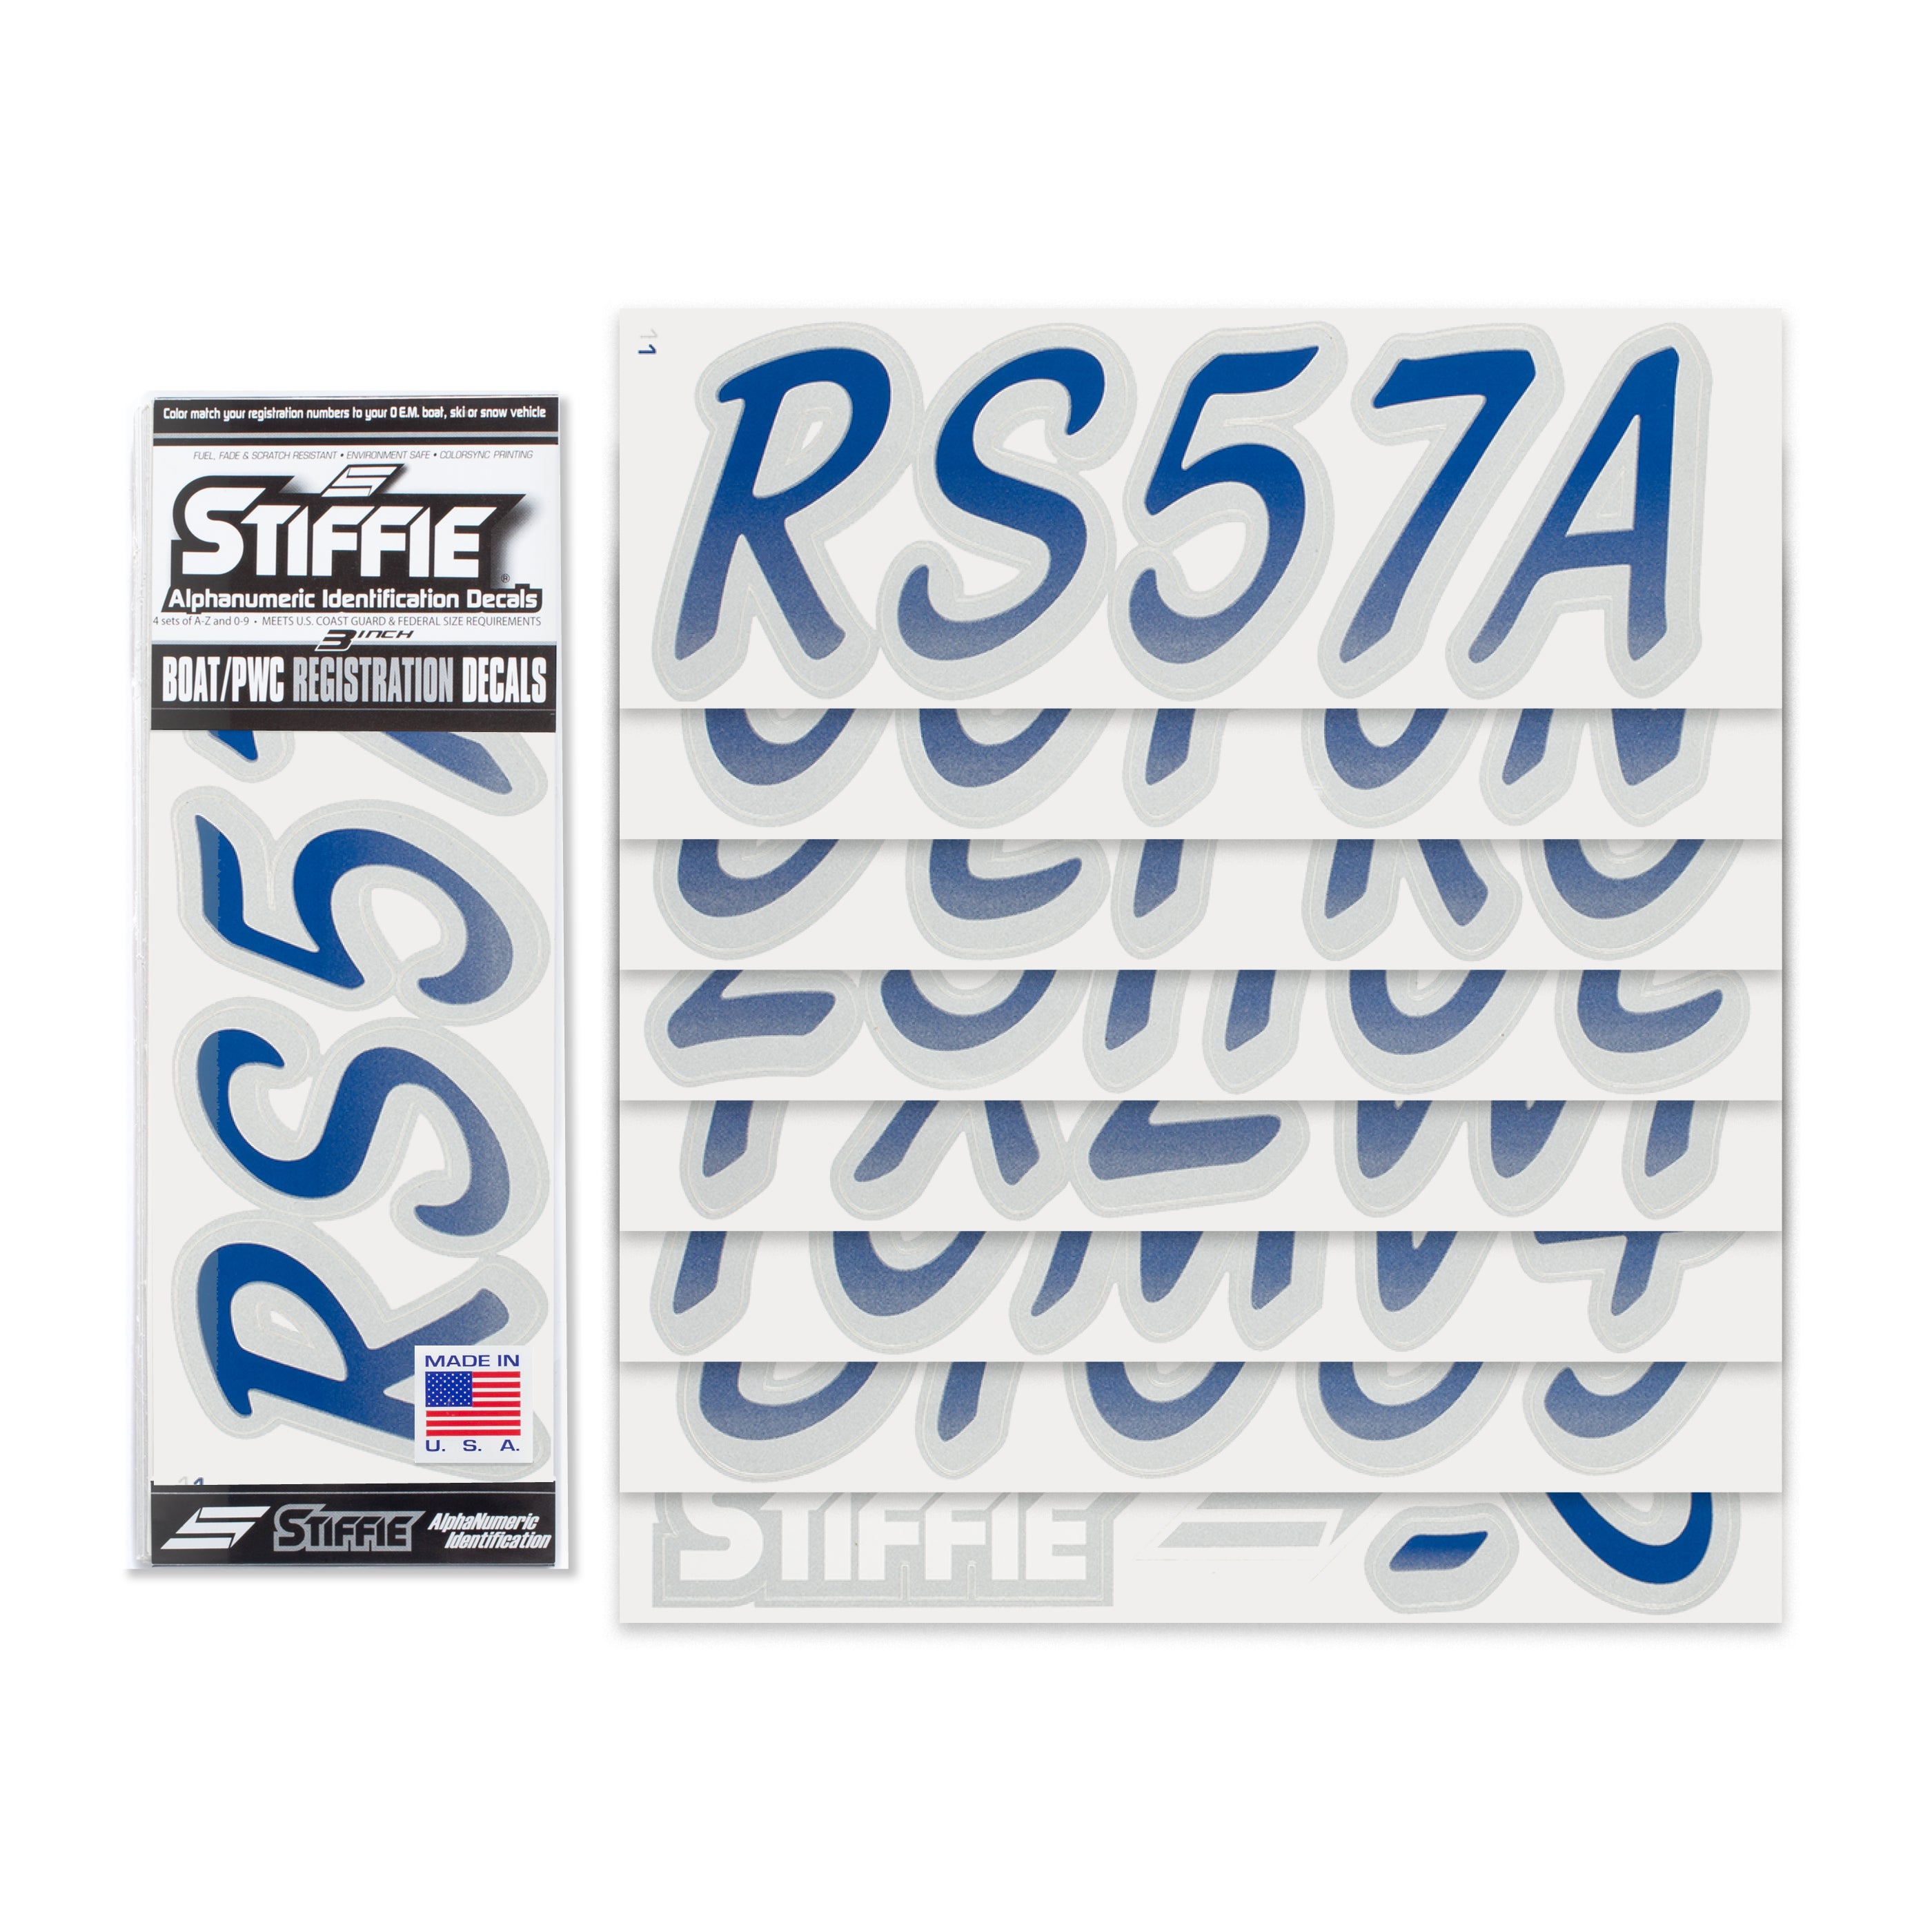 STIFFIE Whipline Navy/Silver 3" Alpha-Numeric Registration Identification Numbers Stickers Decals for Boats & Personal Watercraft